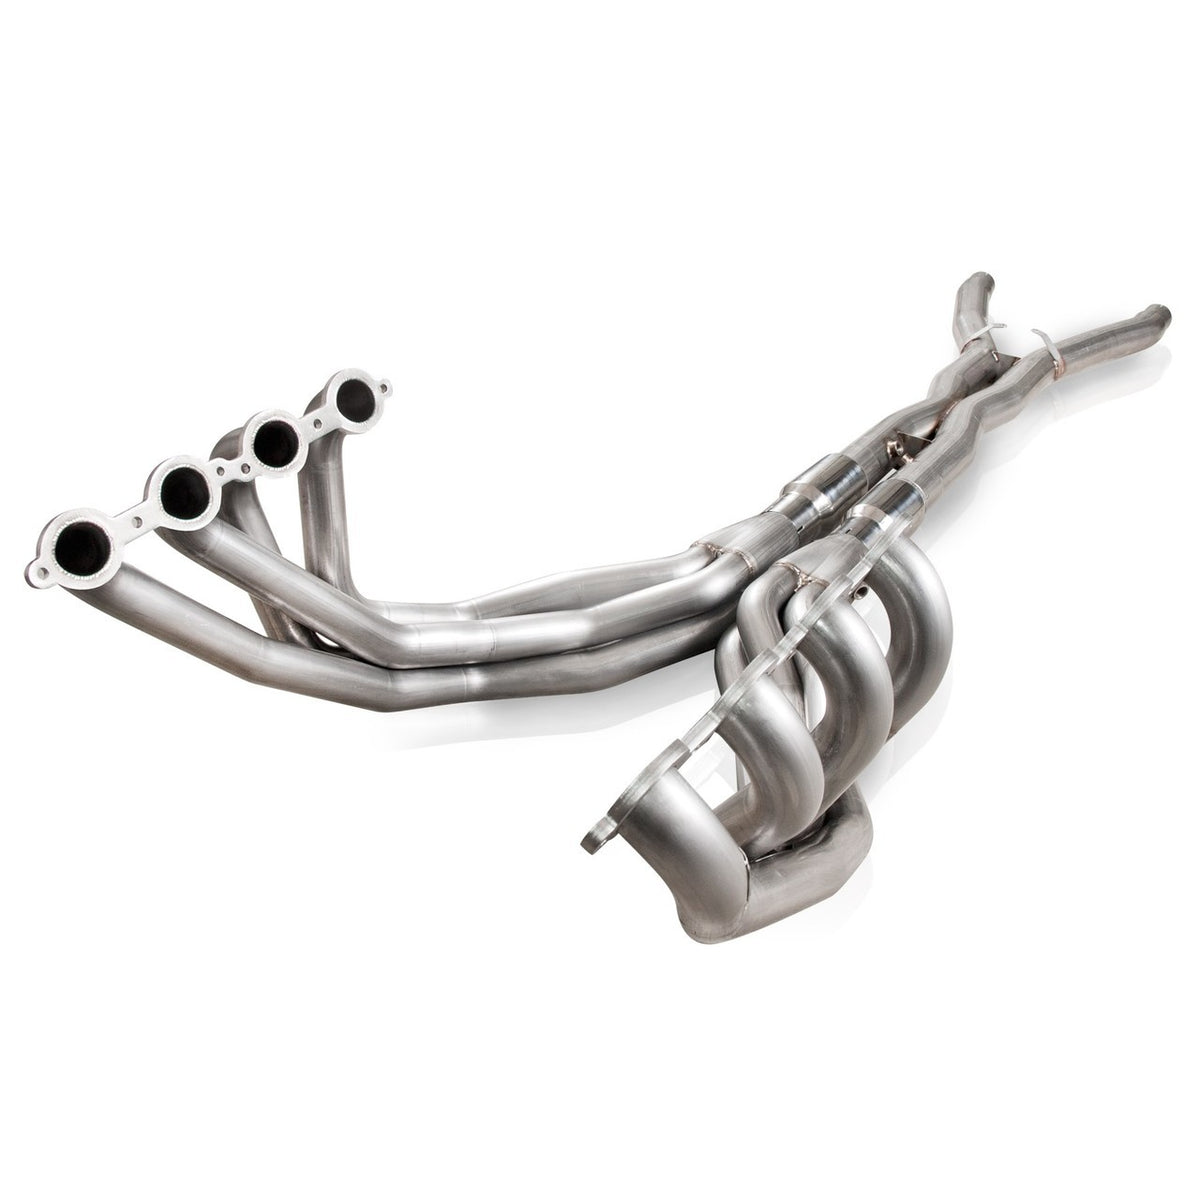 2009-2013 C6 CORVETTE HEADERS: 1-7/8" WITH CATS, STAINLESS WORKS